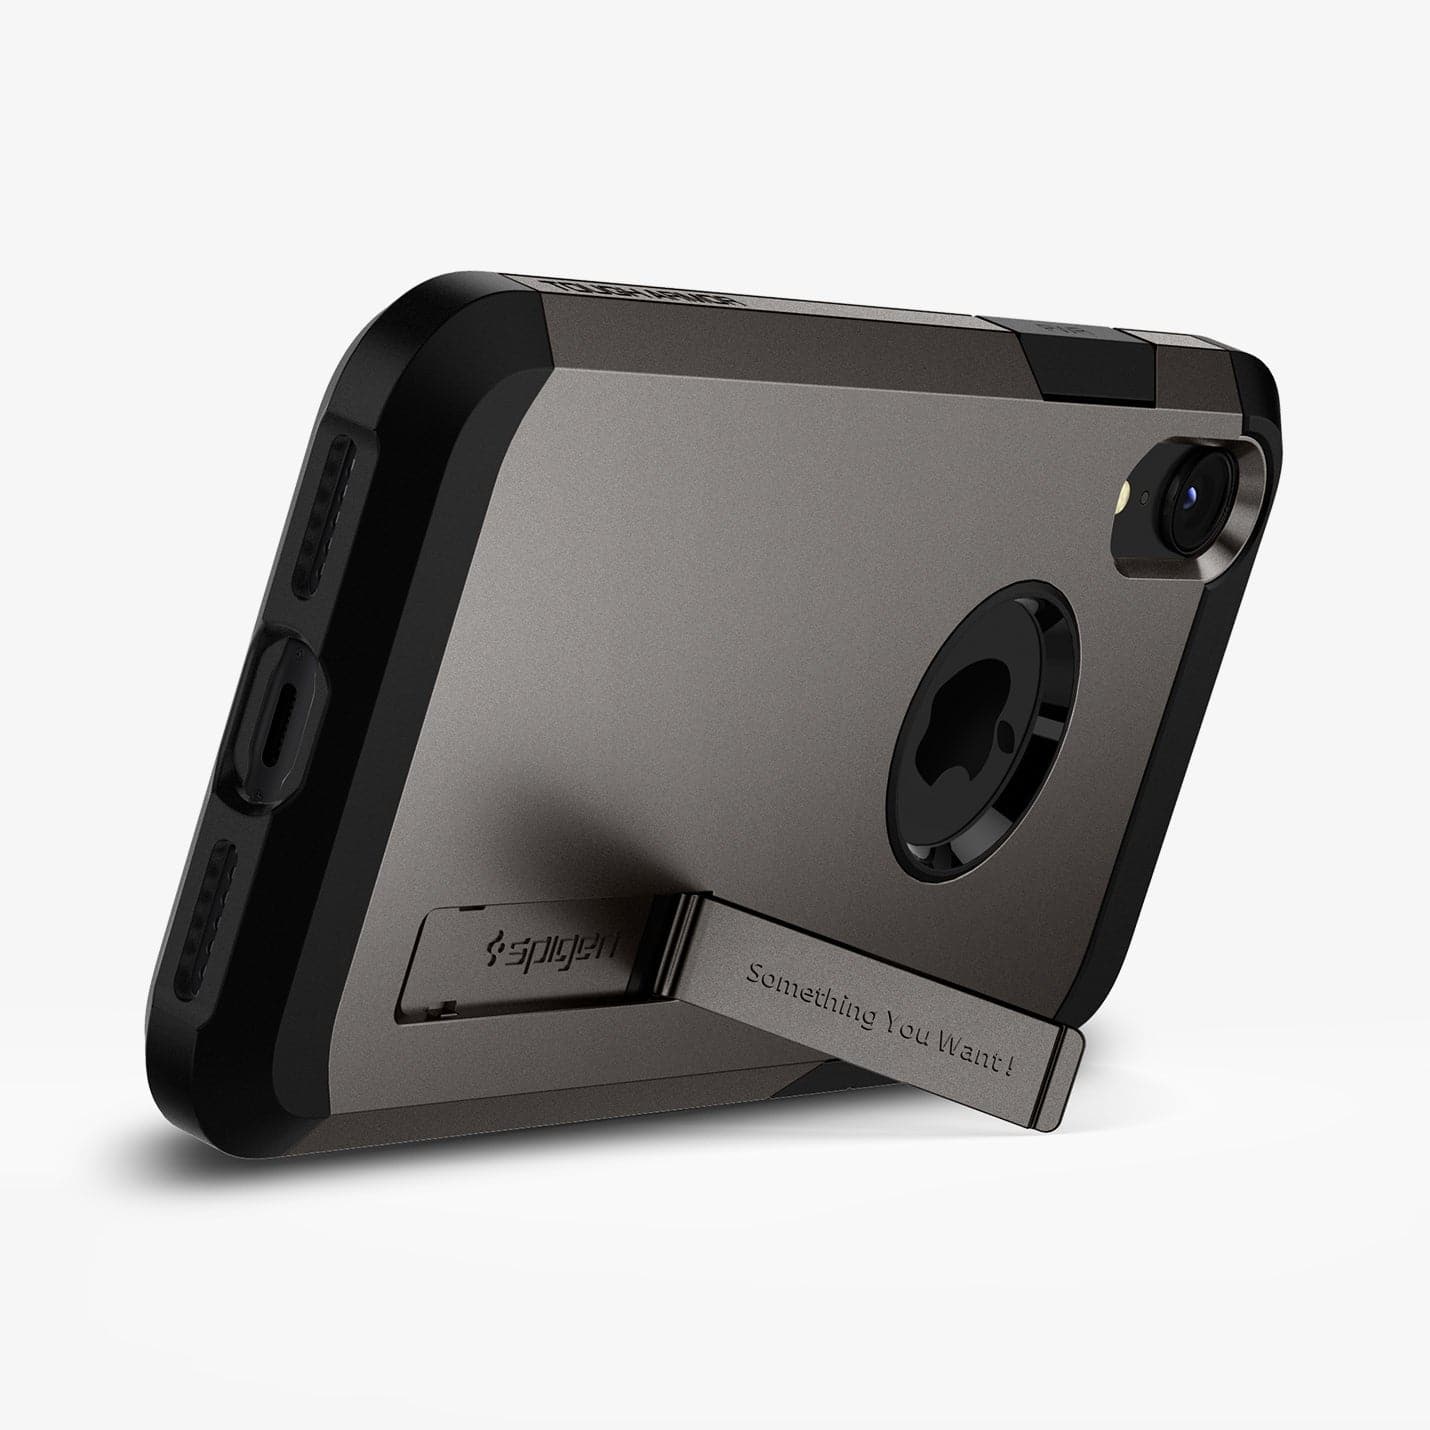 064CS24877 - iPhone XR Case Tough Armor in gunmetal showing the device propped up by built in kickstand